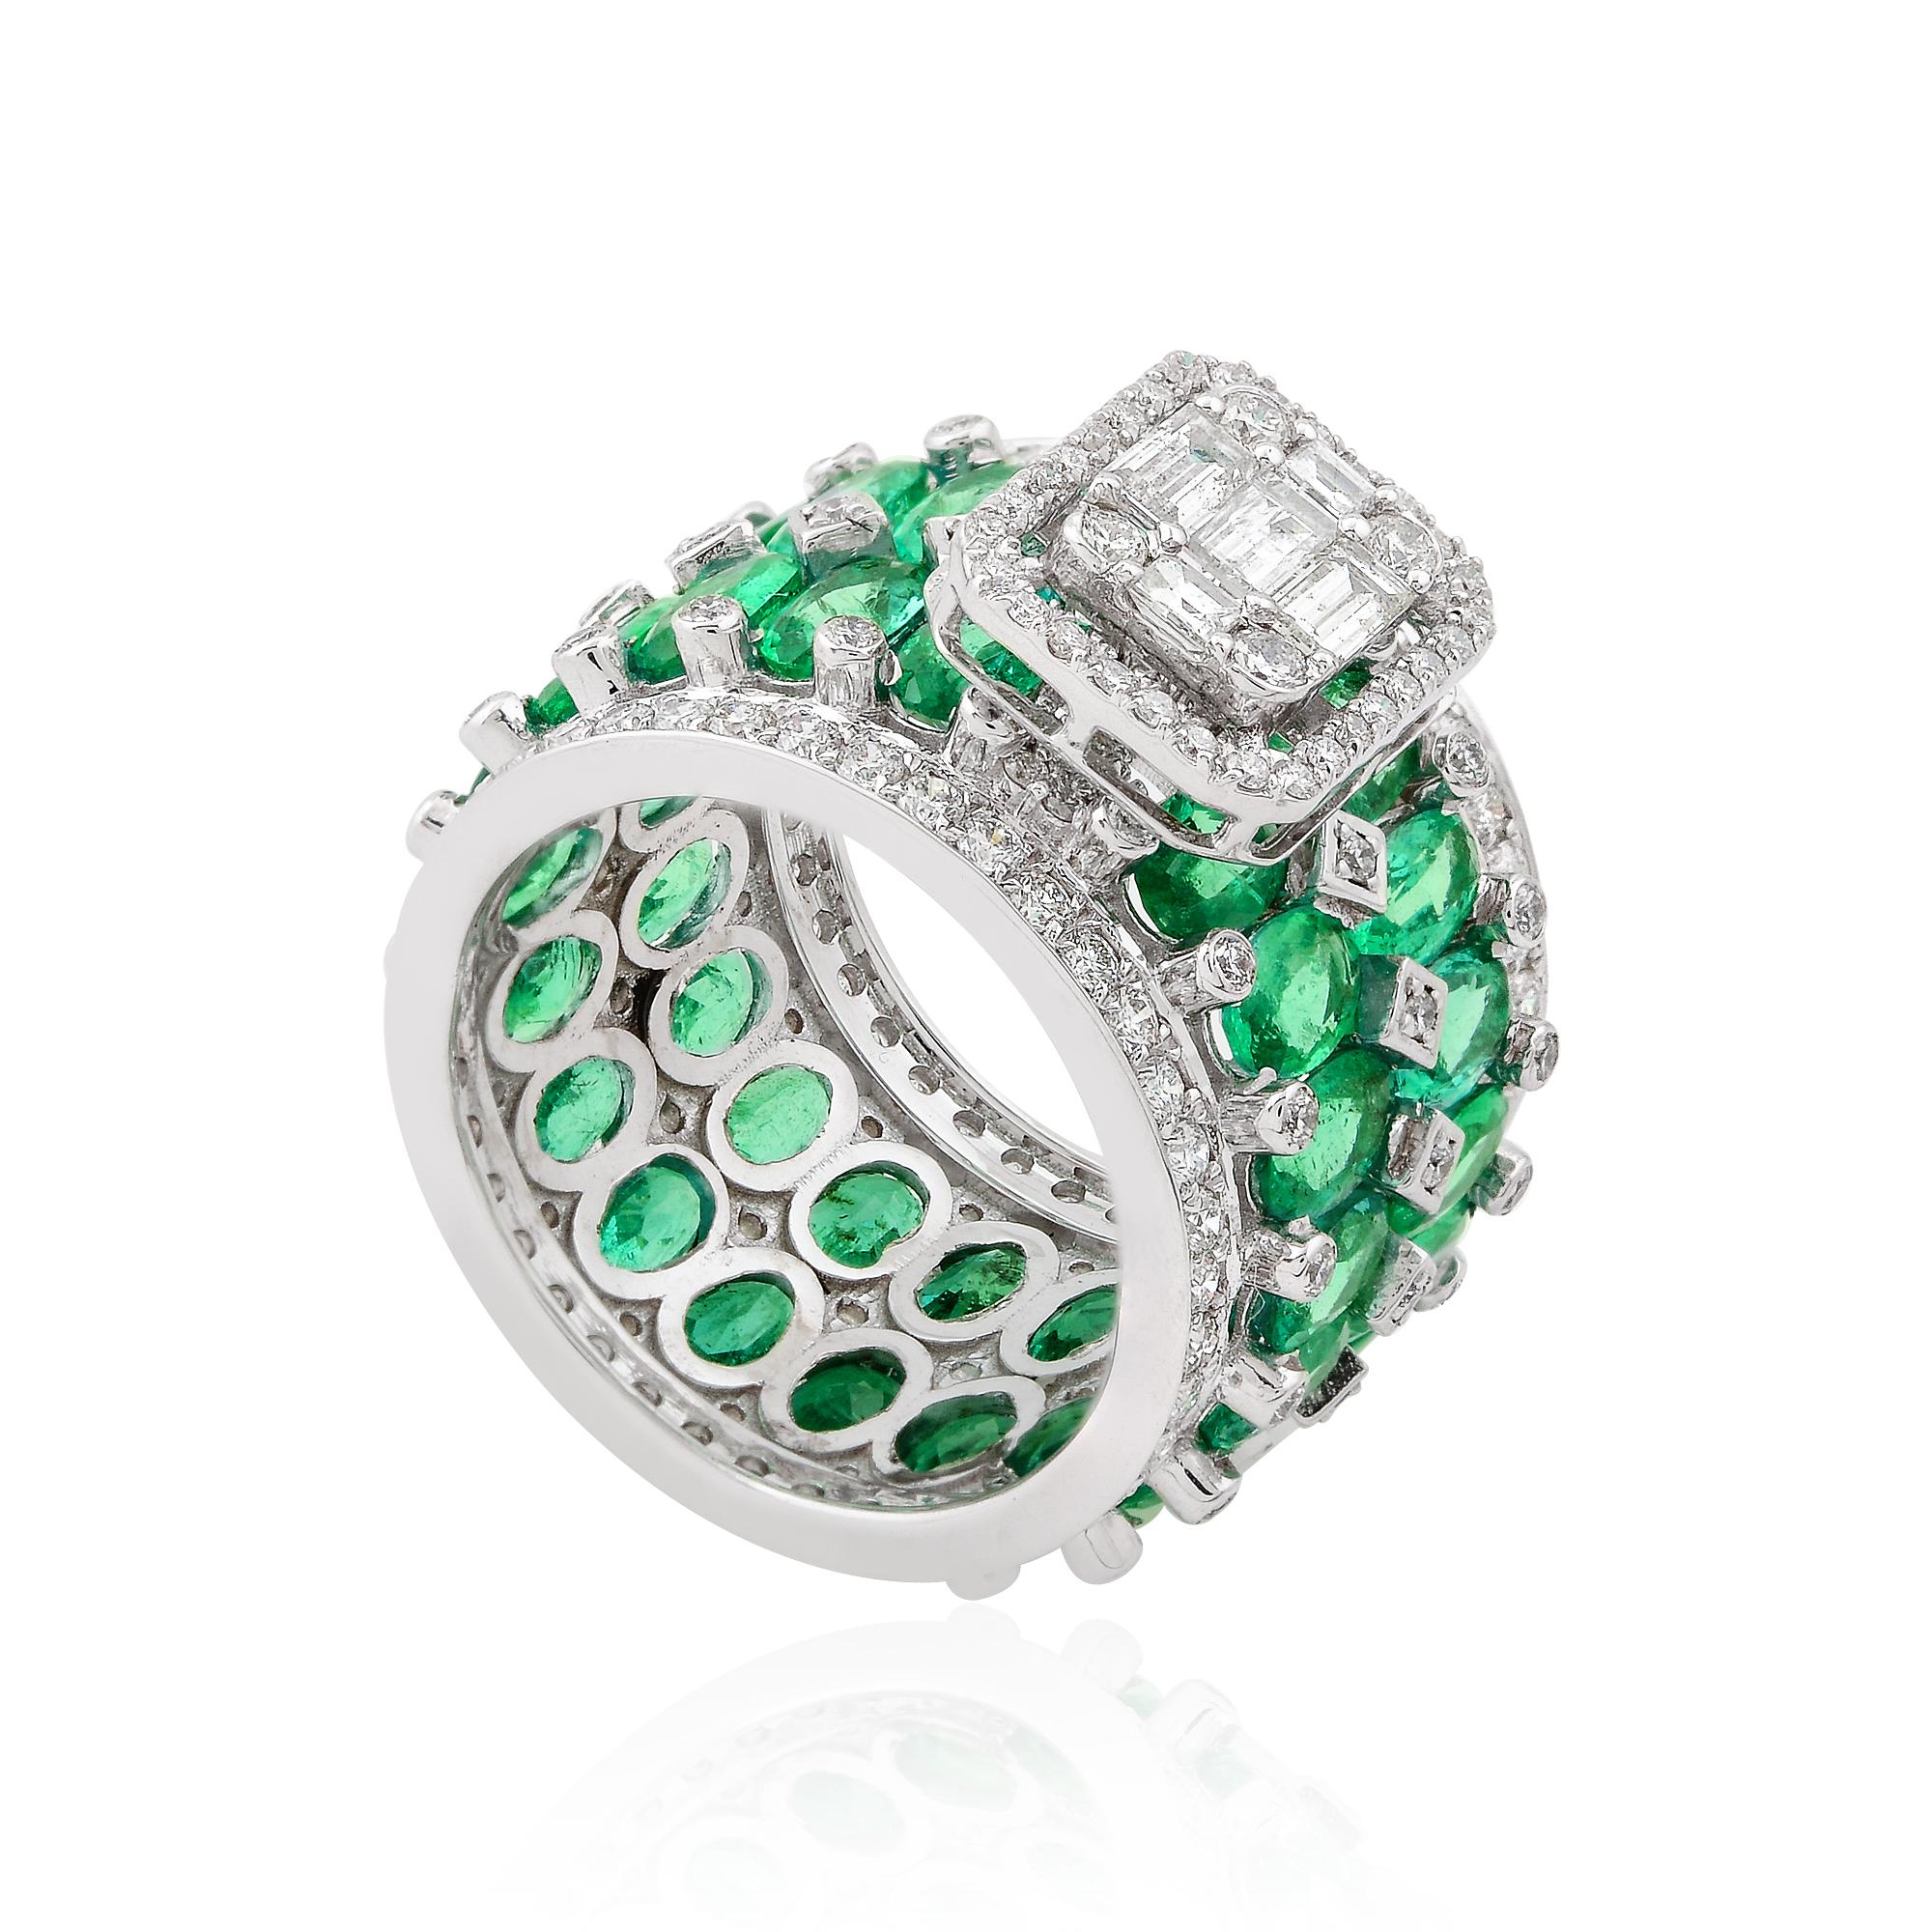 For Sale:  Oval Natural Emerald Gemstone Band Ring Baguette Diamond 18k White Gold Jewelry 3